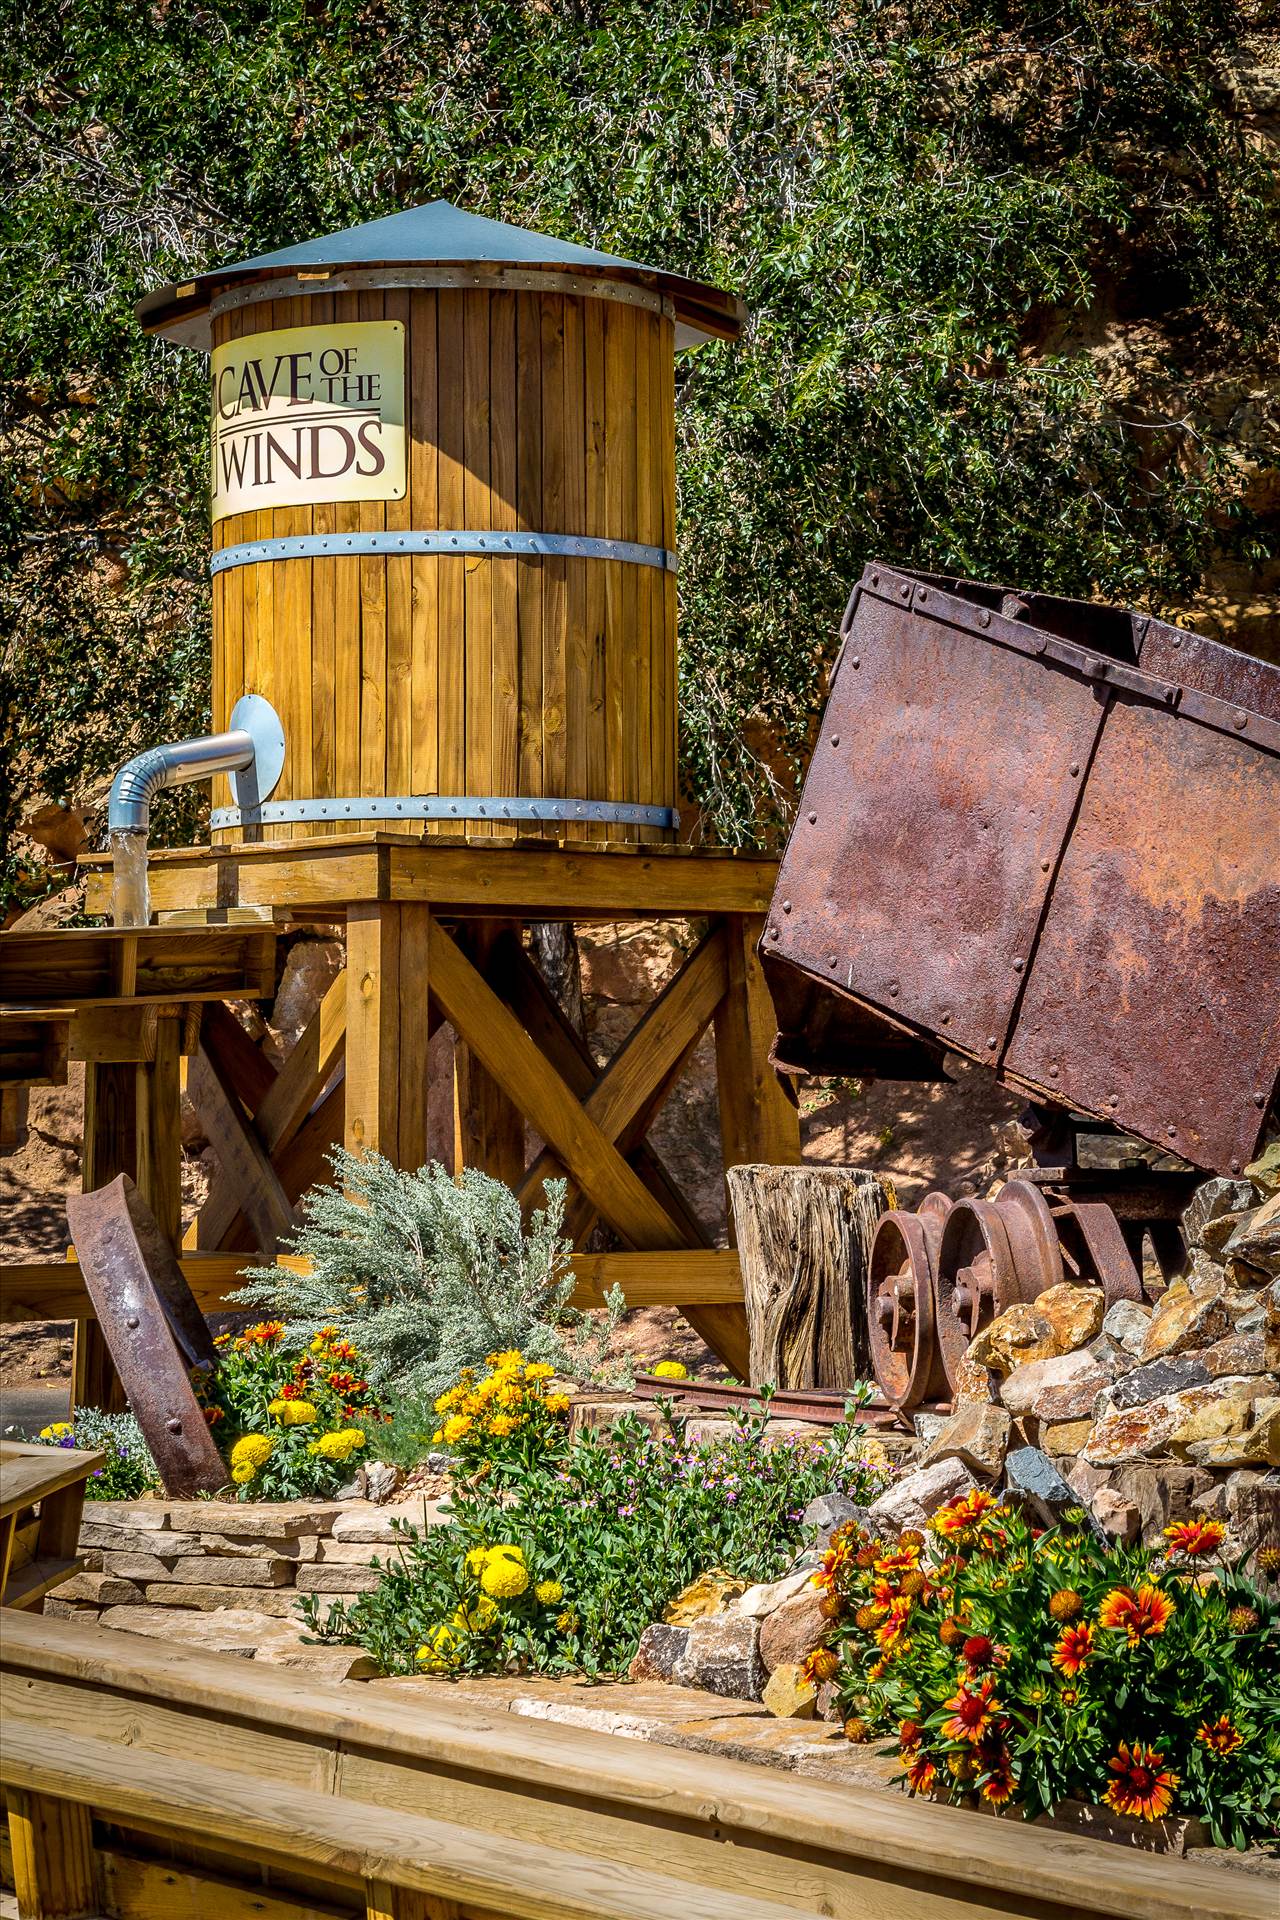 Cave of the Winds Display - A rustic display outside the entrance to the Cave of the Winds in Manitou, Colorado. by Scott Smith Photos